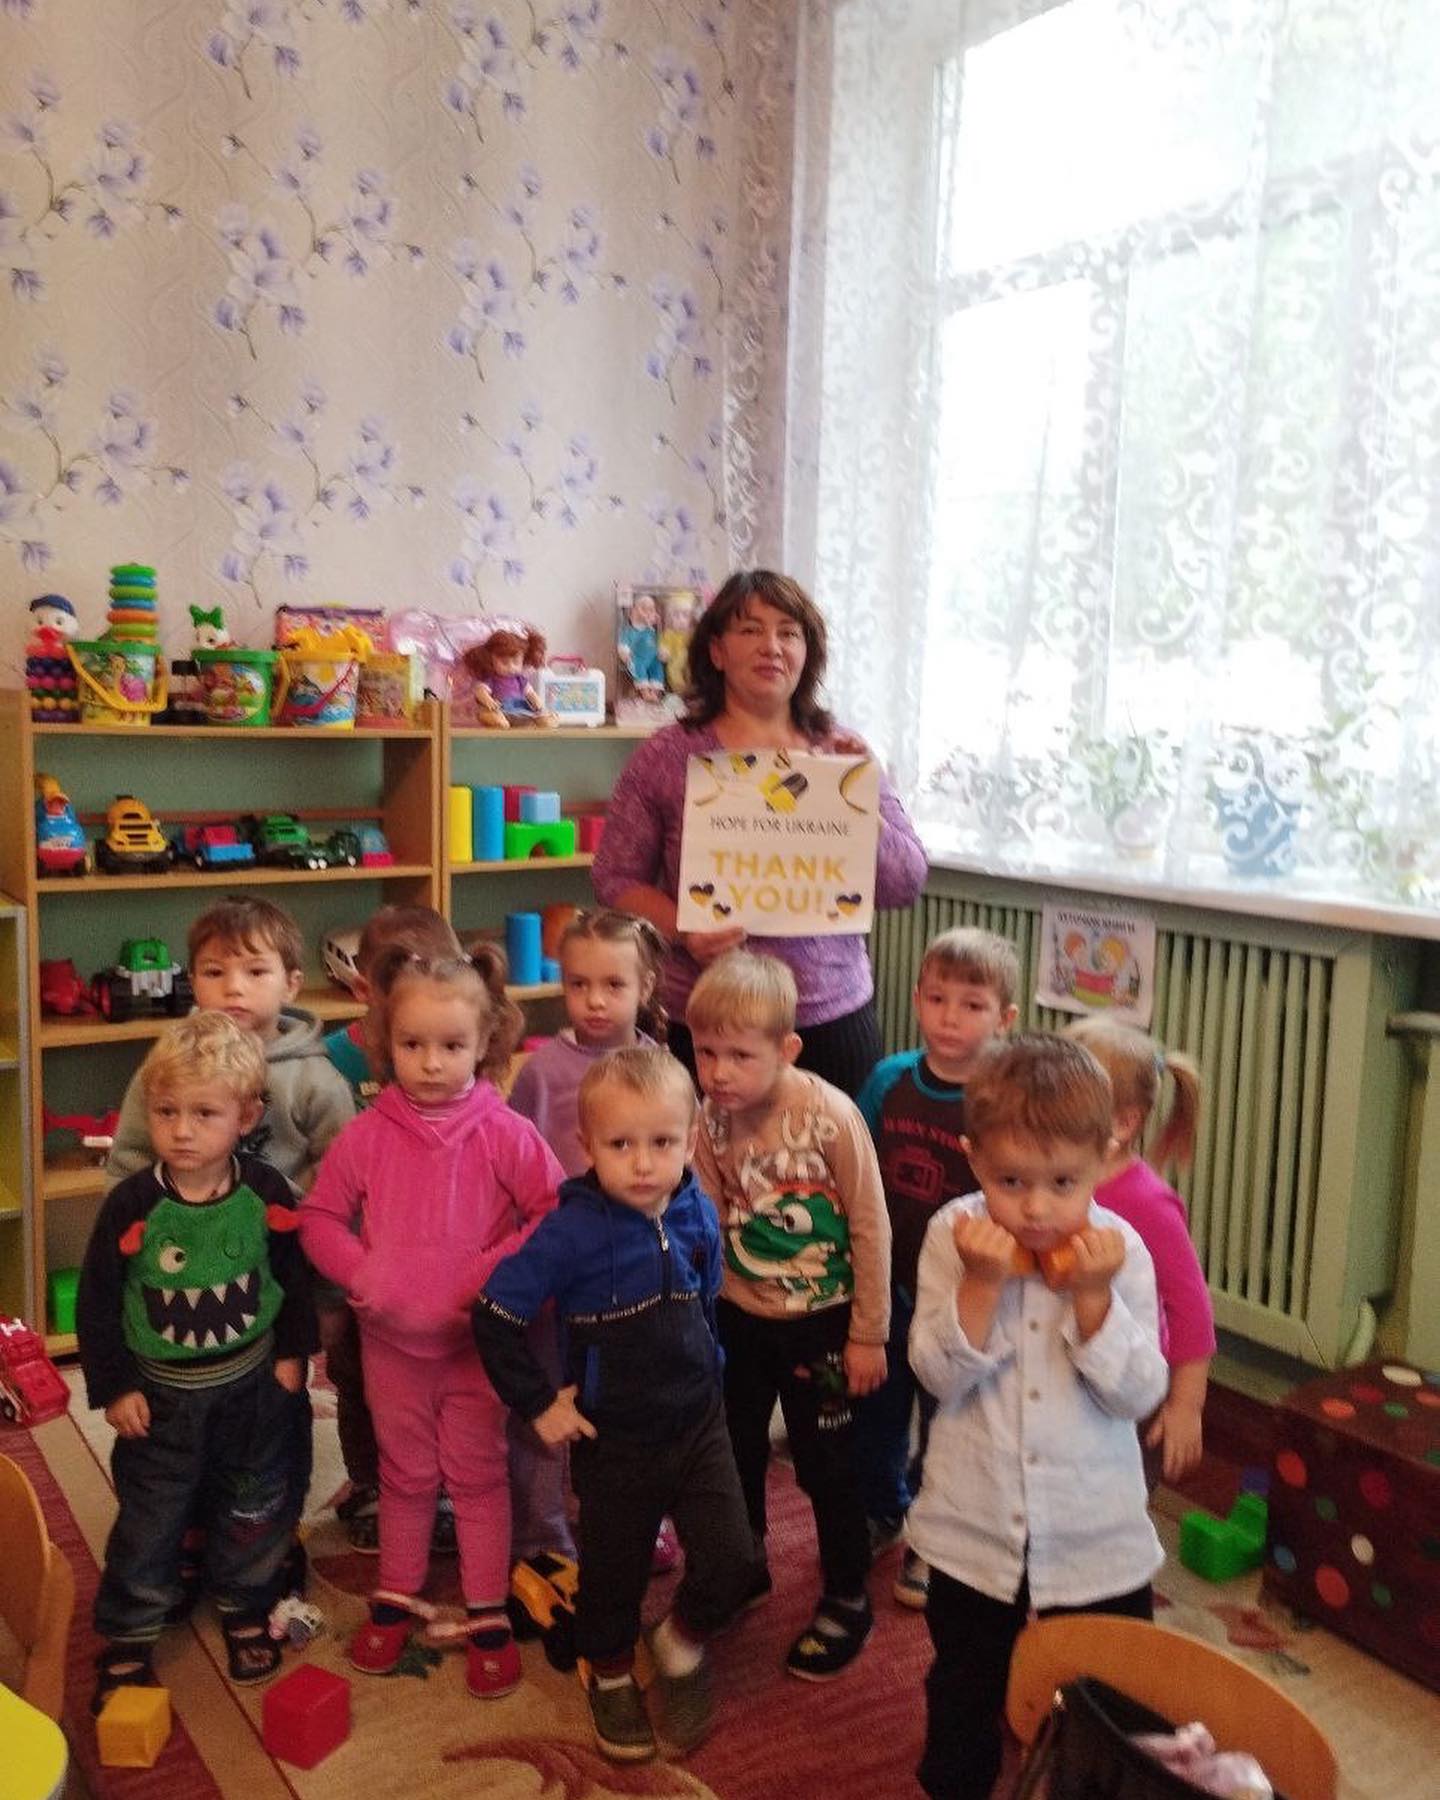 A group of children posing for a picture in a playroom.